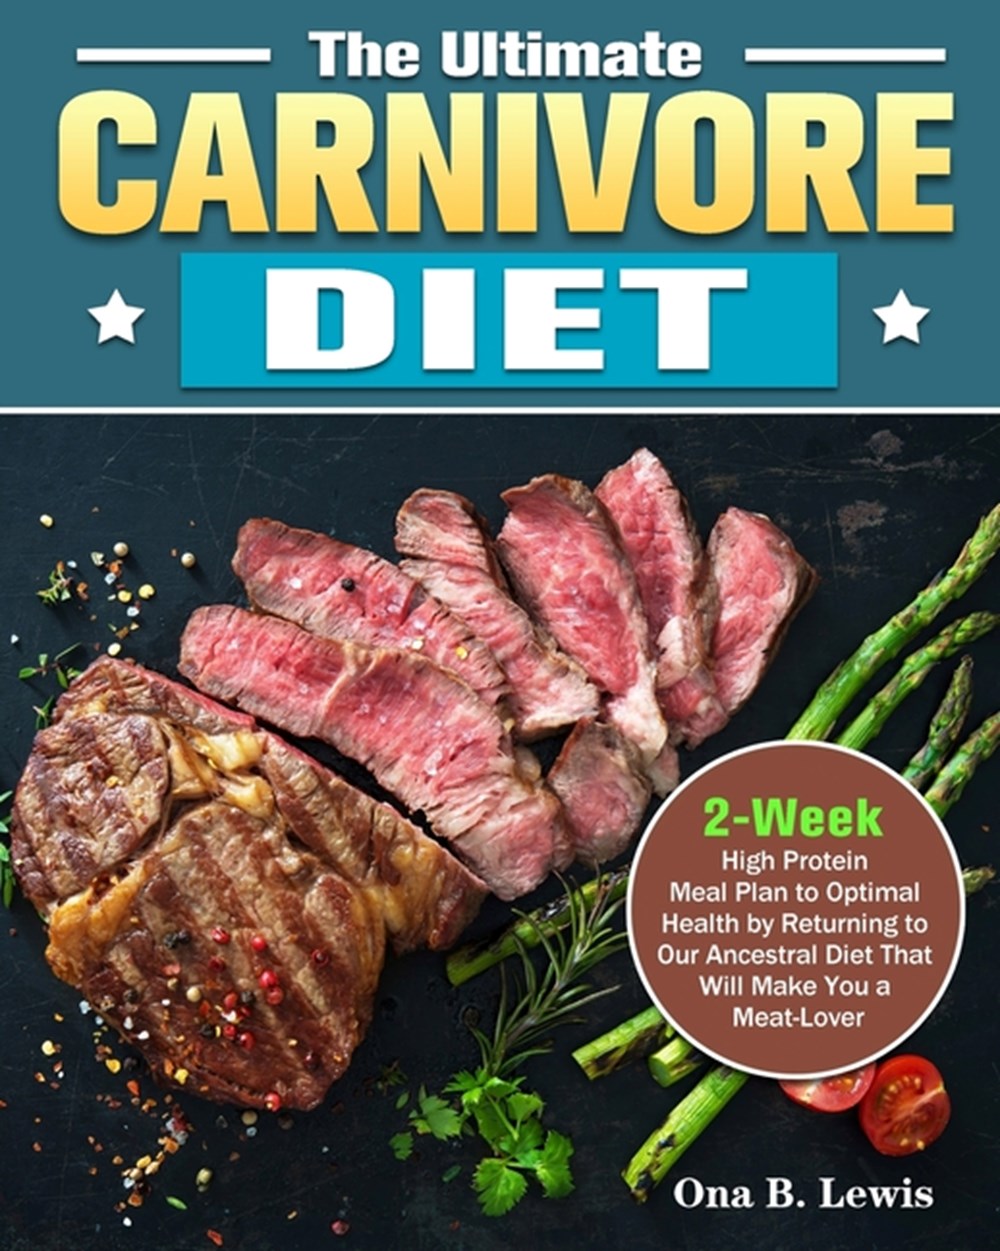 Ultimate Carnivore Diet 2-Week High Protein Meal Plan to Optimal Health by Returning to Our Ancestra